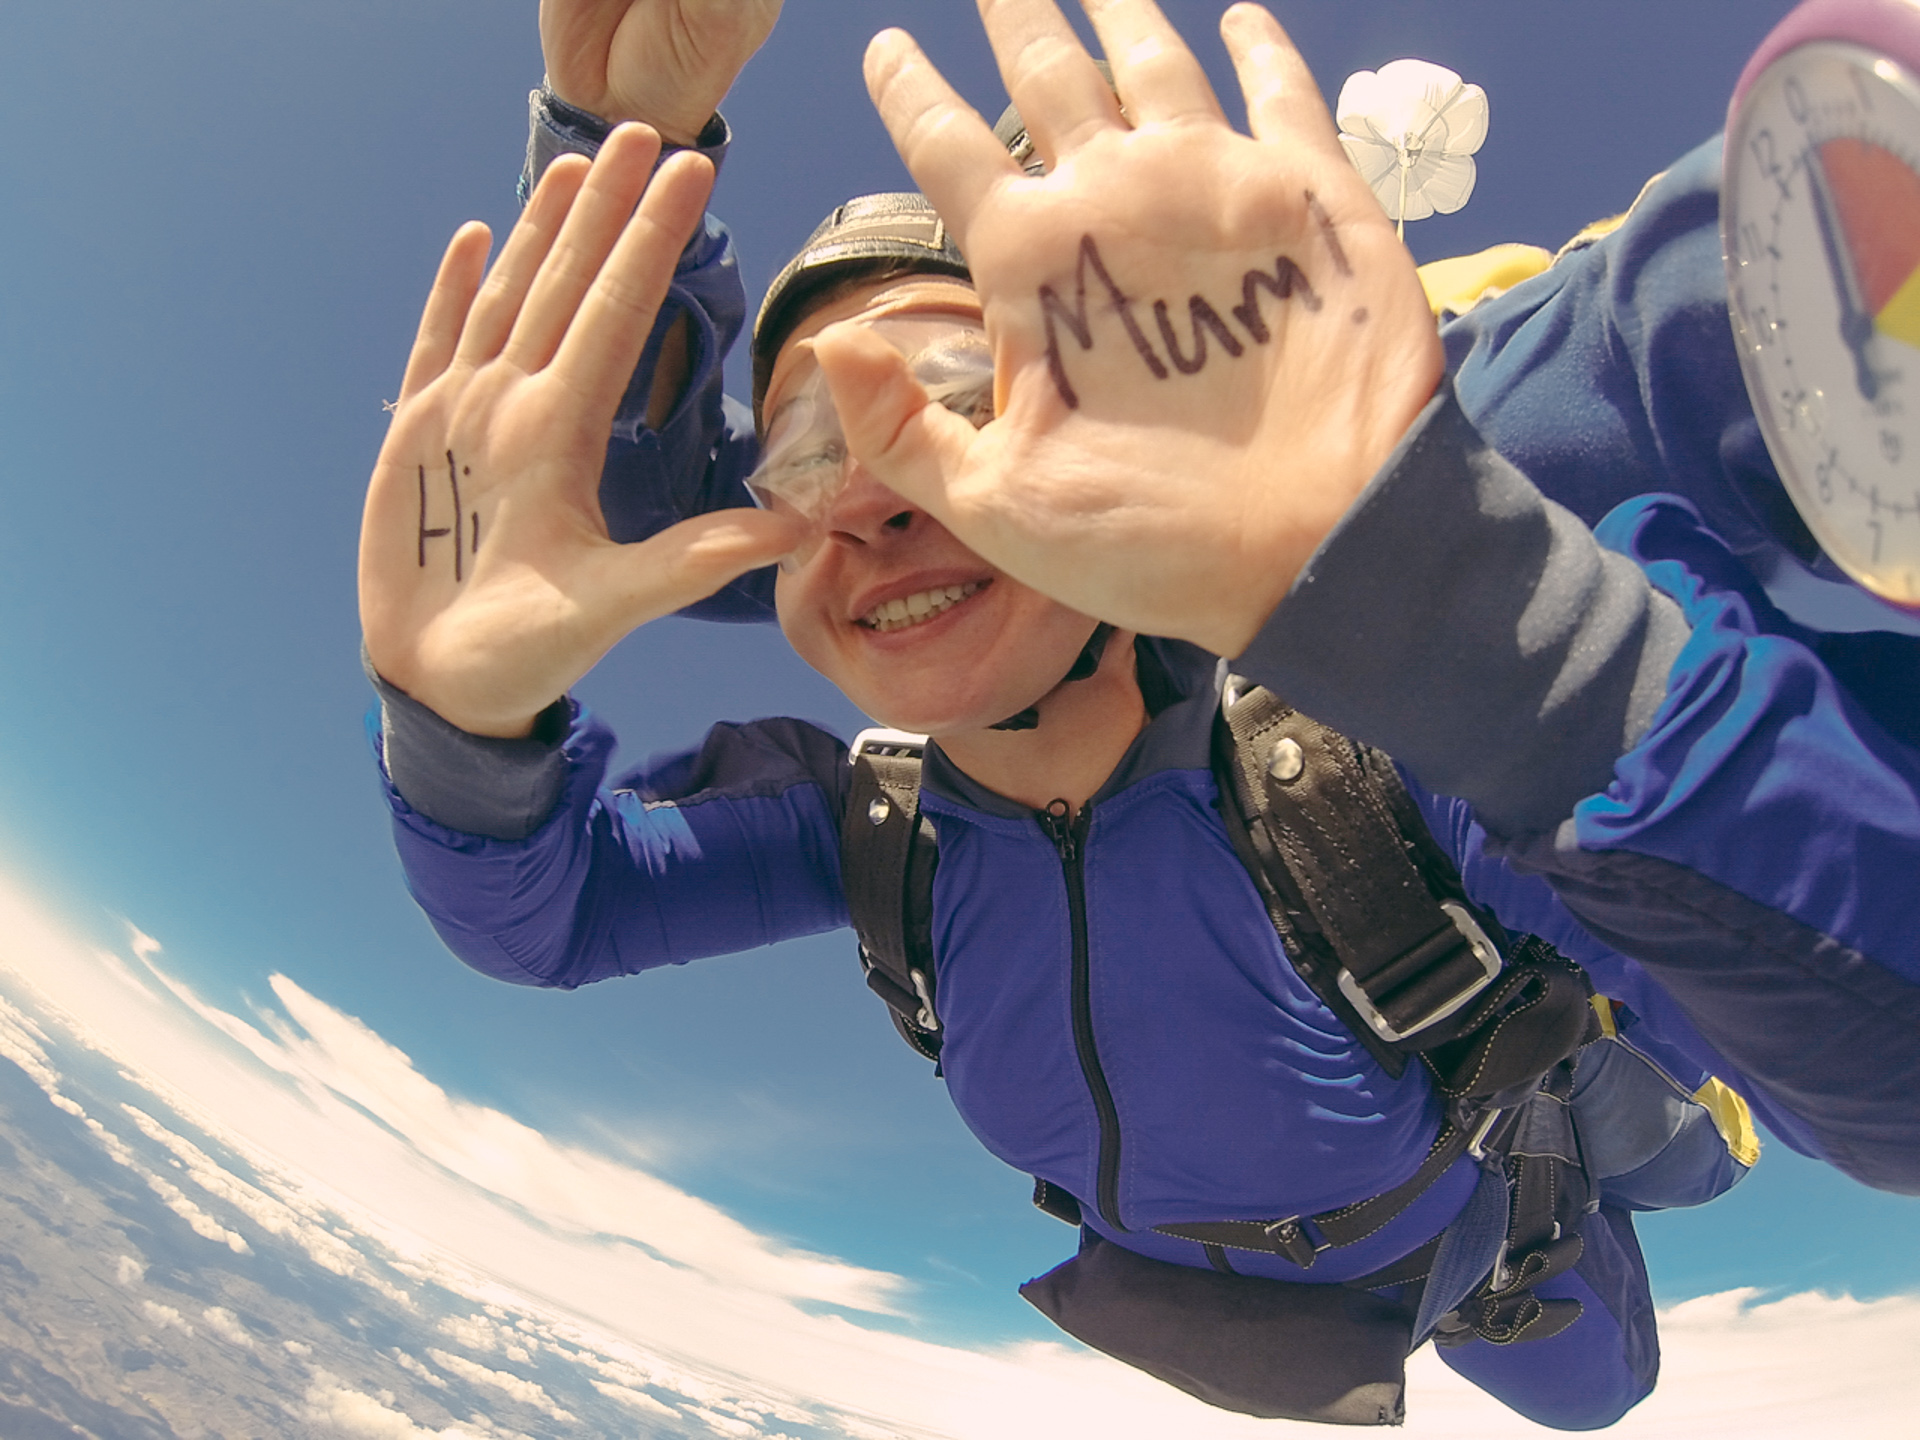 Funny things to write on hands Skydiving over Taupo New Zealand - Kiwi Experience Bus